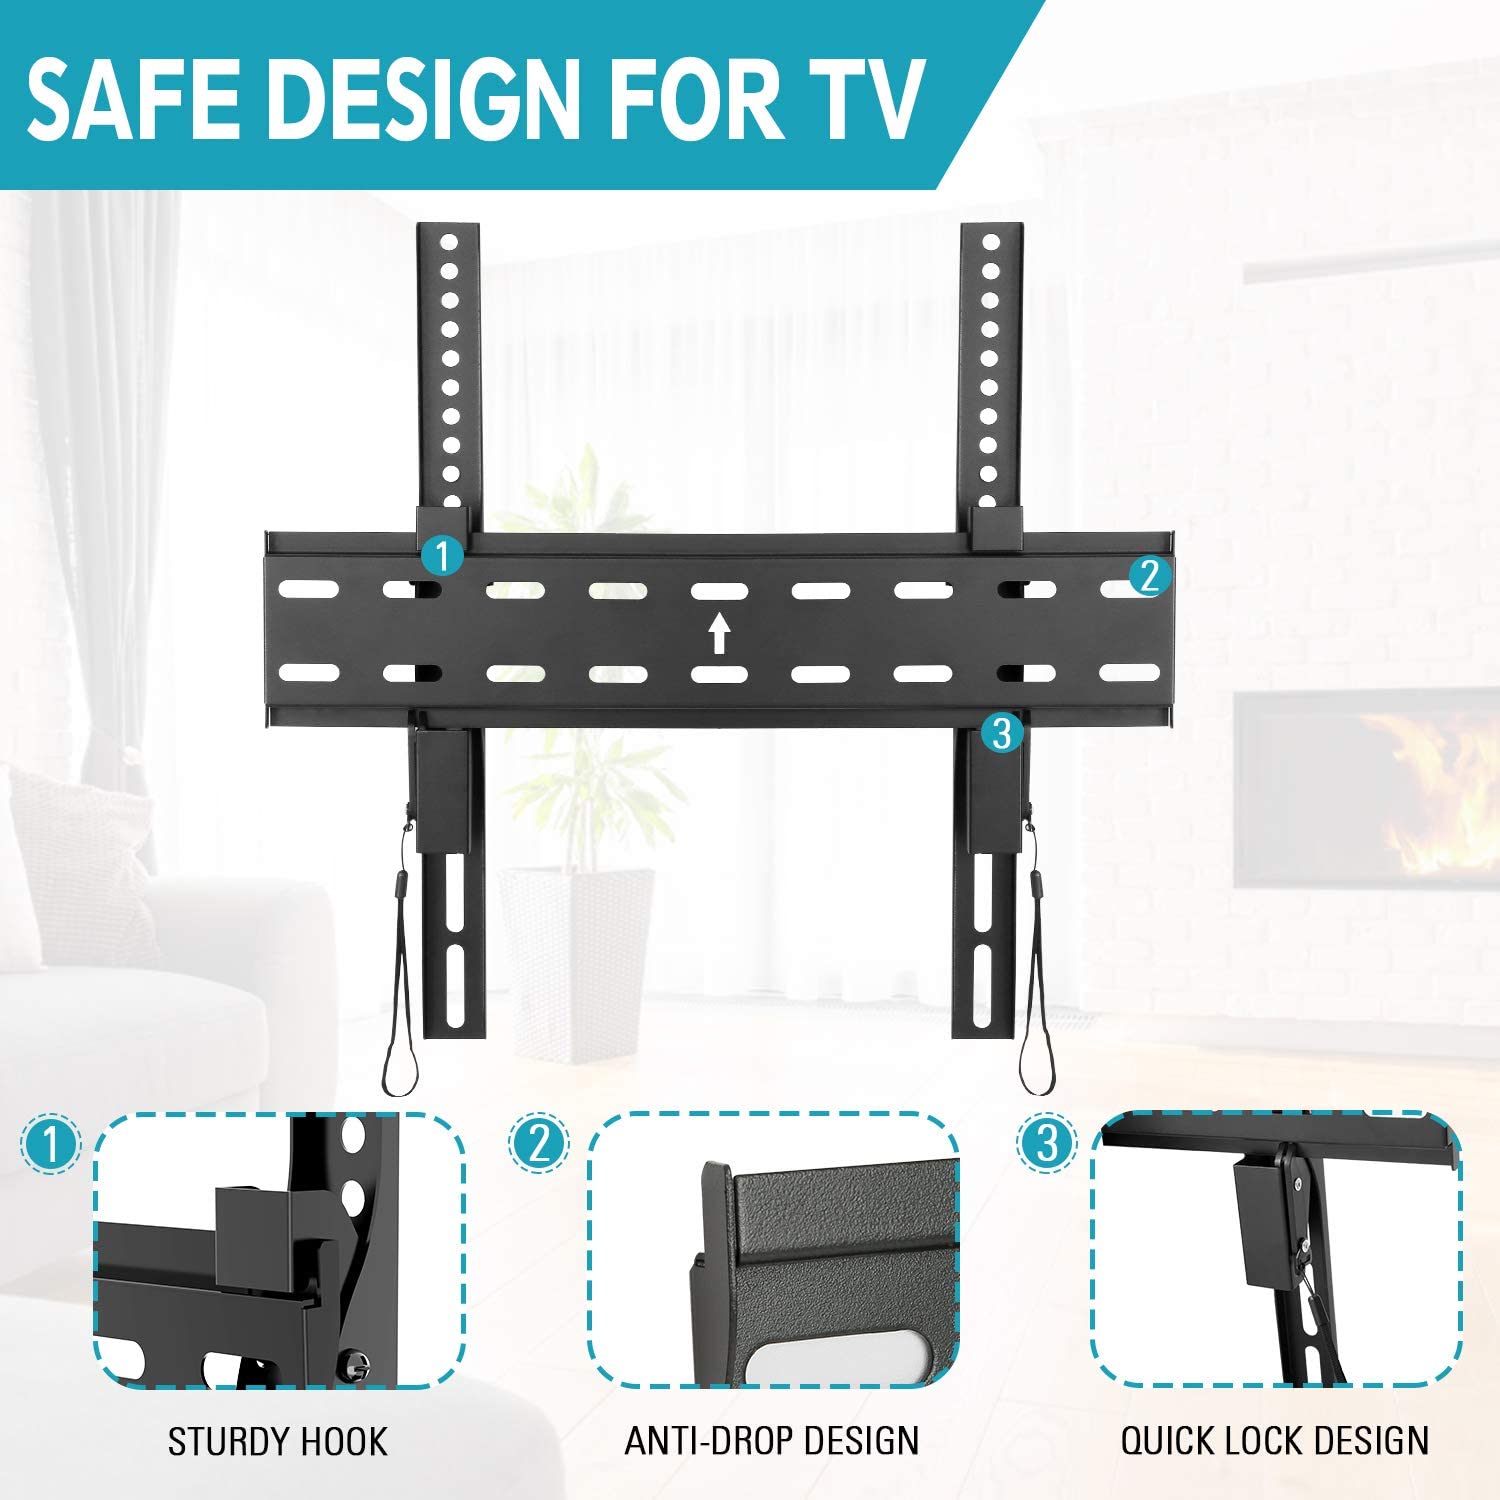 Tilting TV Wall Mount Bracket for 26-55 Inch Flat Screen TVs/Curved TVs, Low Profile TV Wall Mount TV Bracket - image 3 of 5